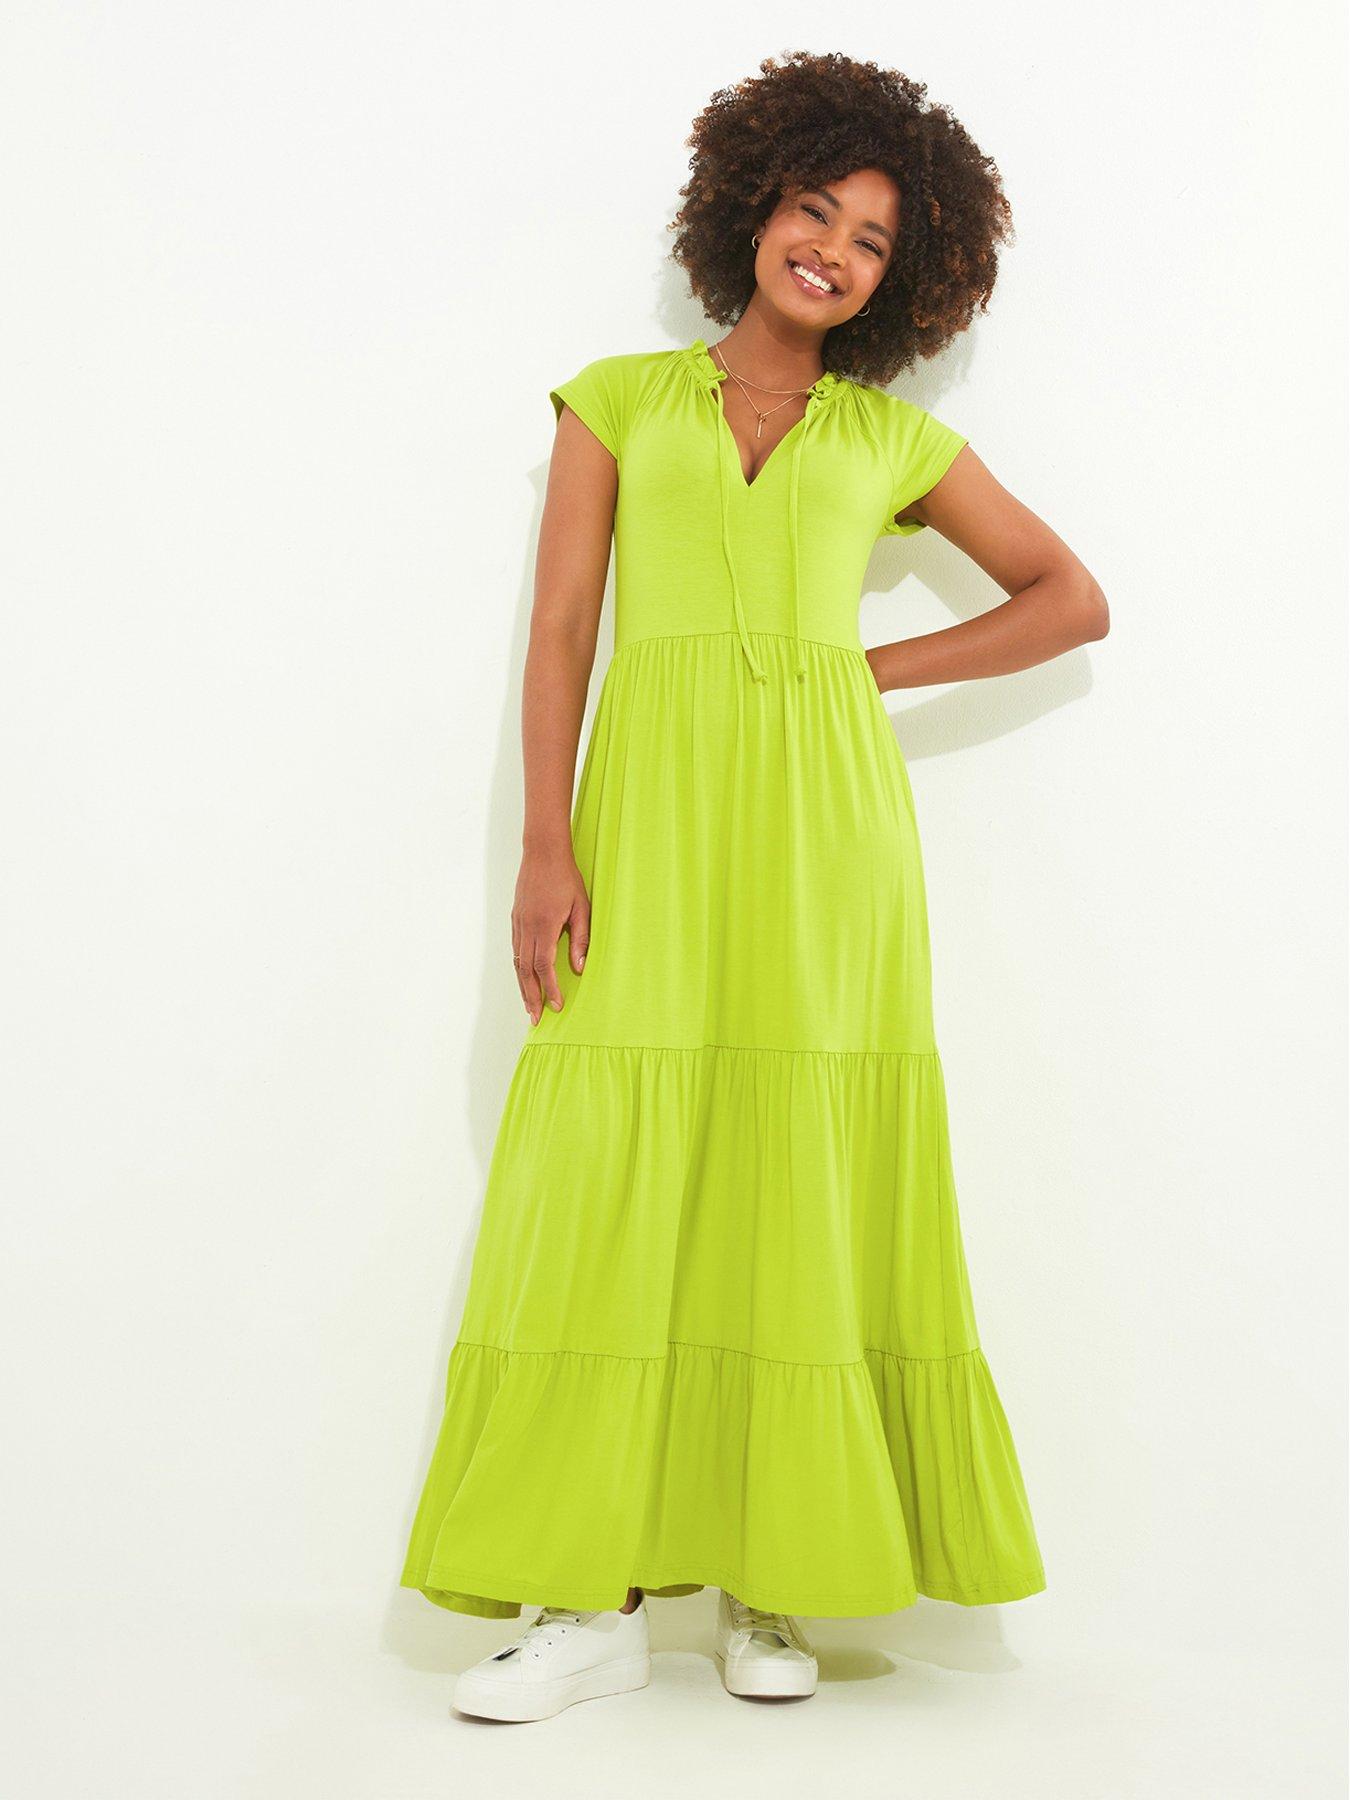 Shop Women's Dresses, All Occasions & Sizes